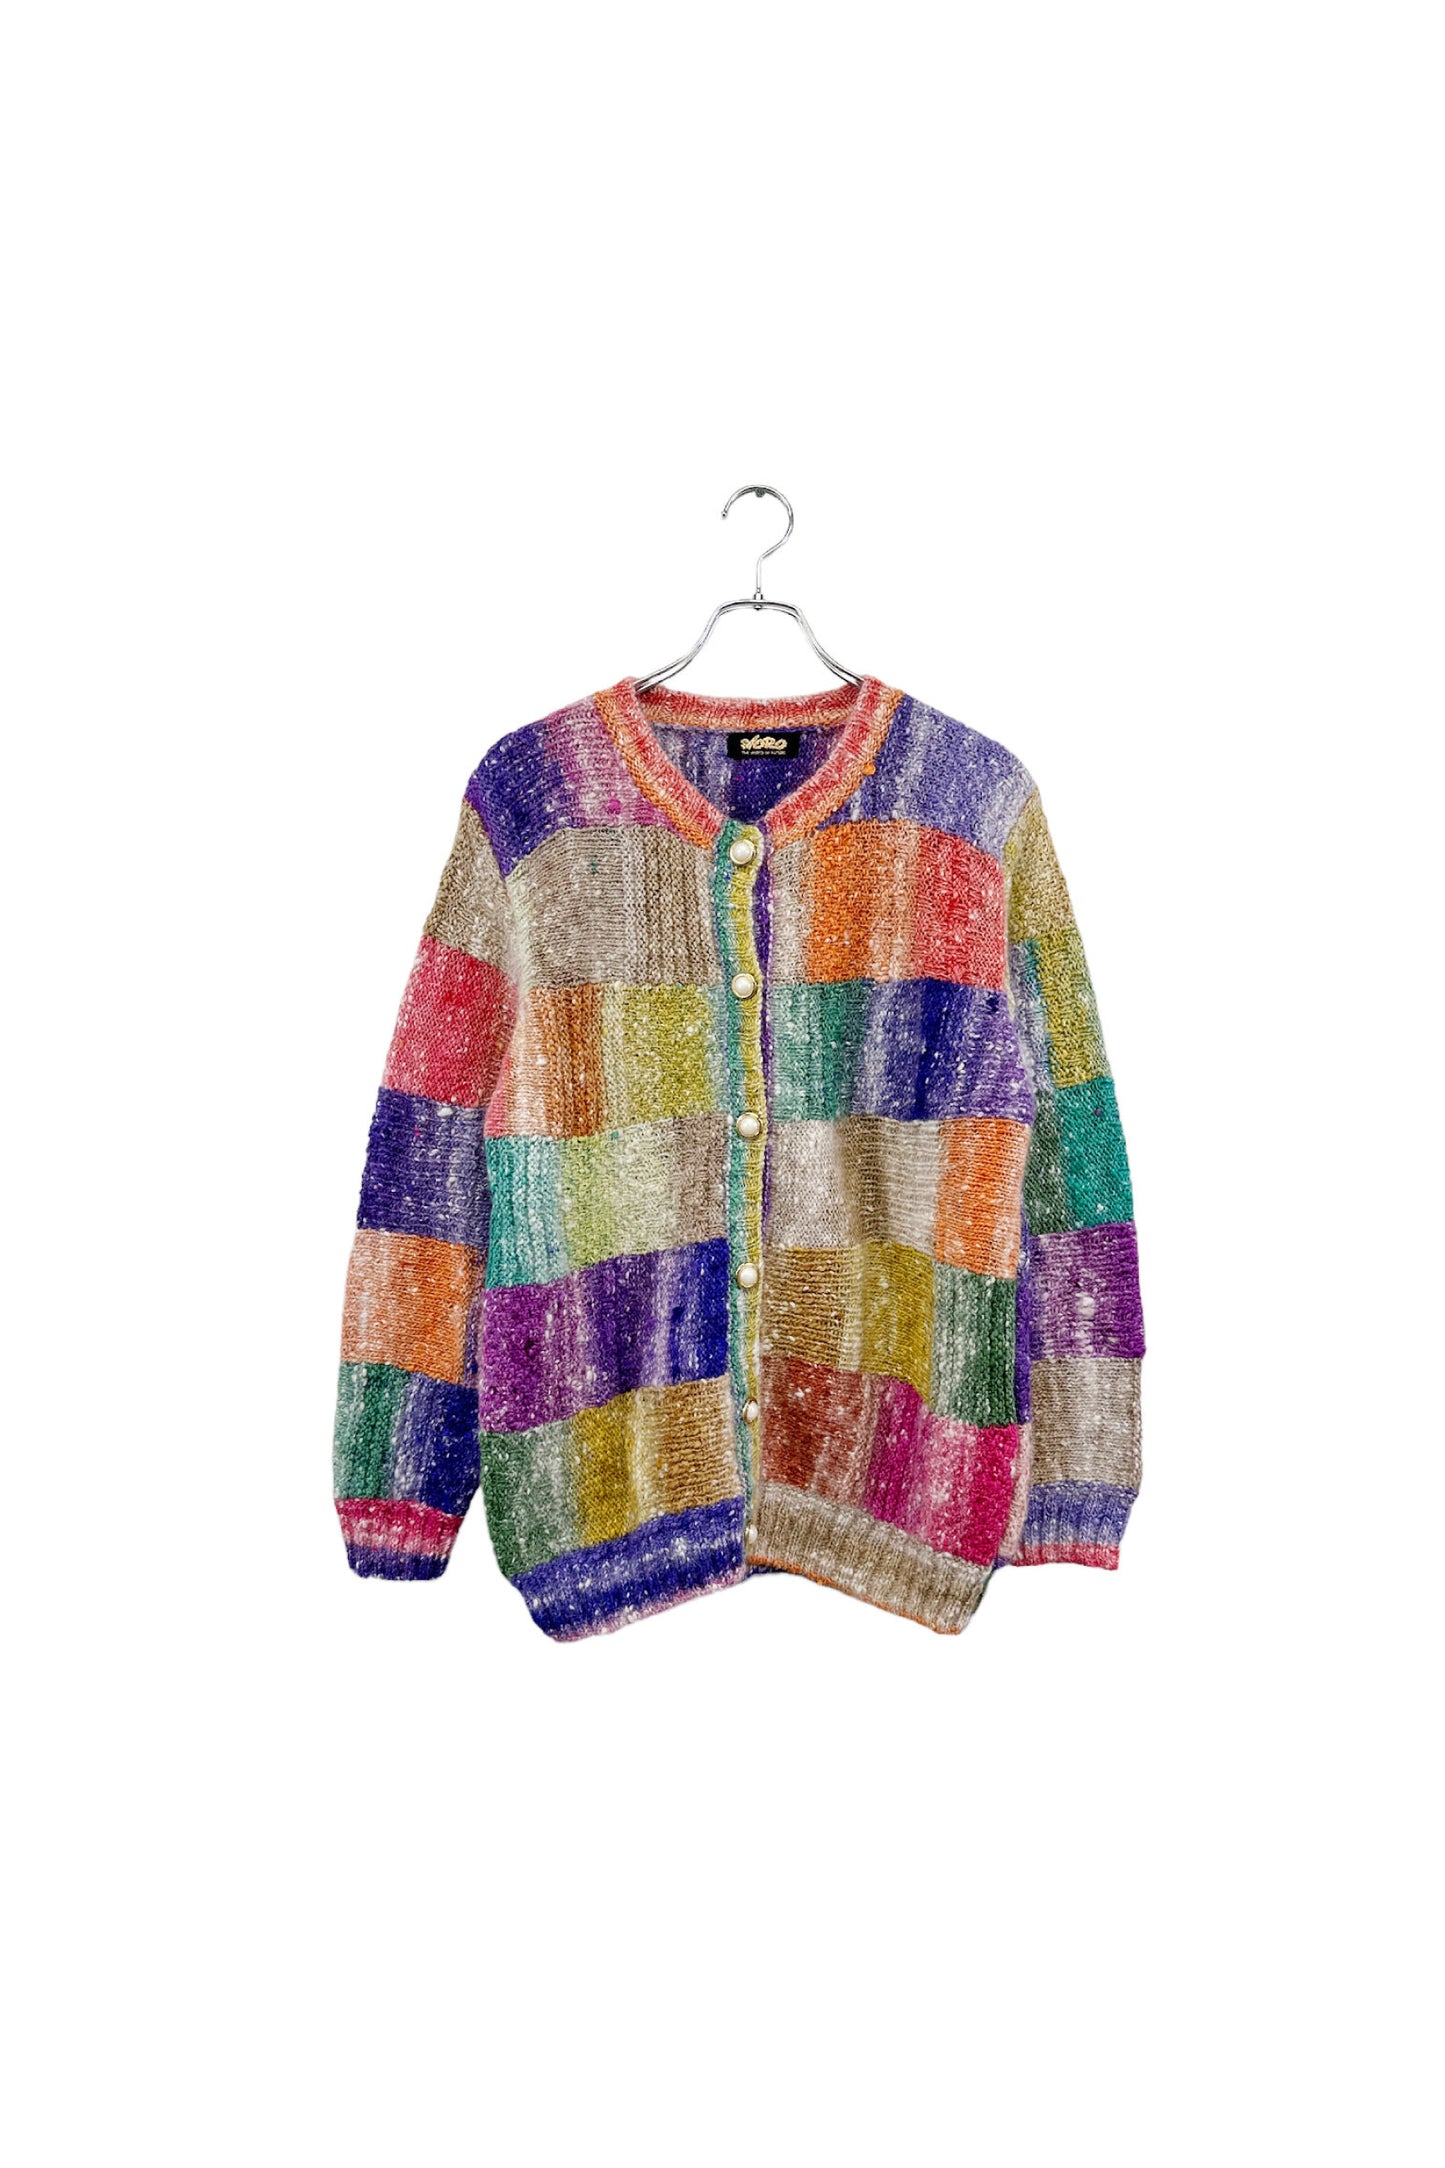 NORO hand knit patchwork cardigan